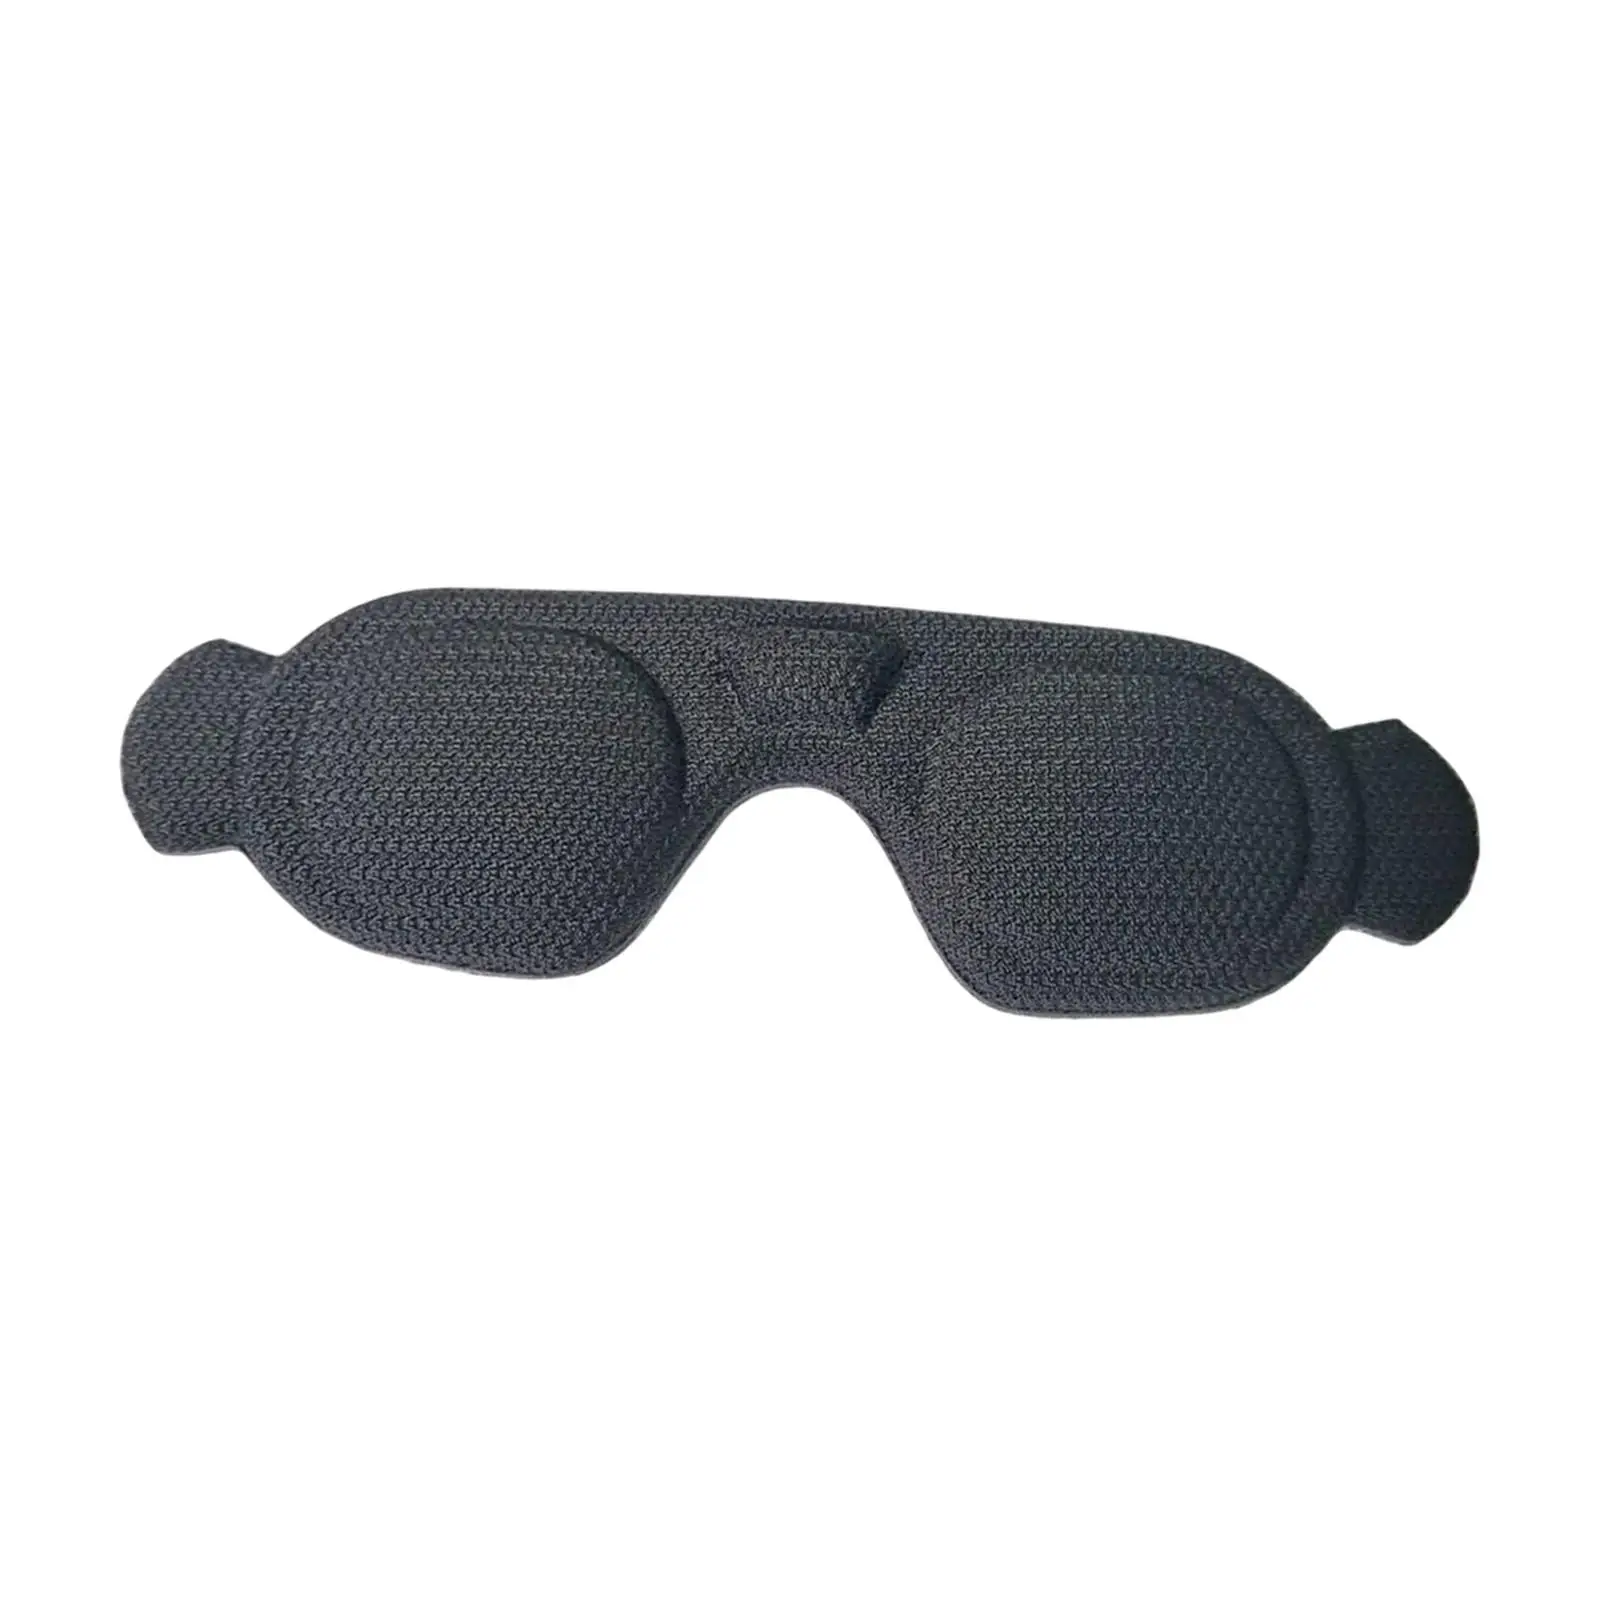 

Lens Protector Prevent Sunshine Light Dustproof Lightproof Scratchproof Lens Protection Cover for Goggles Integra Accessory